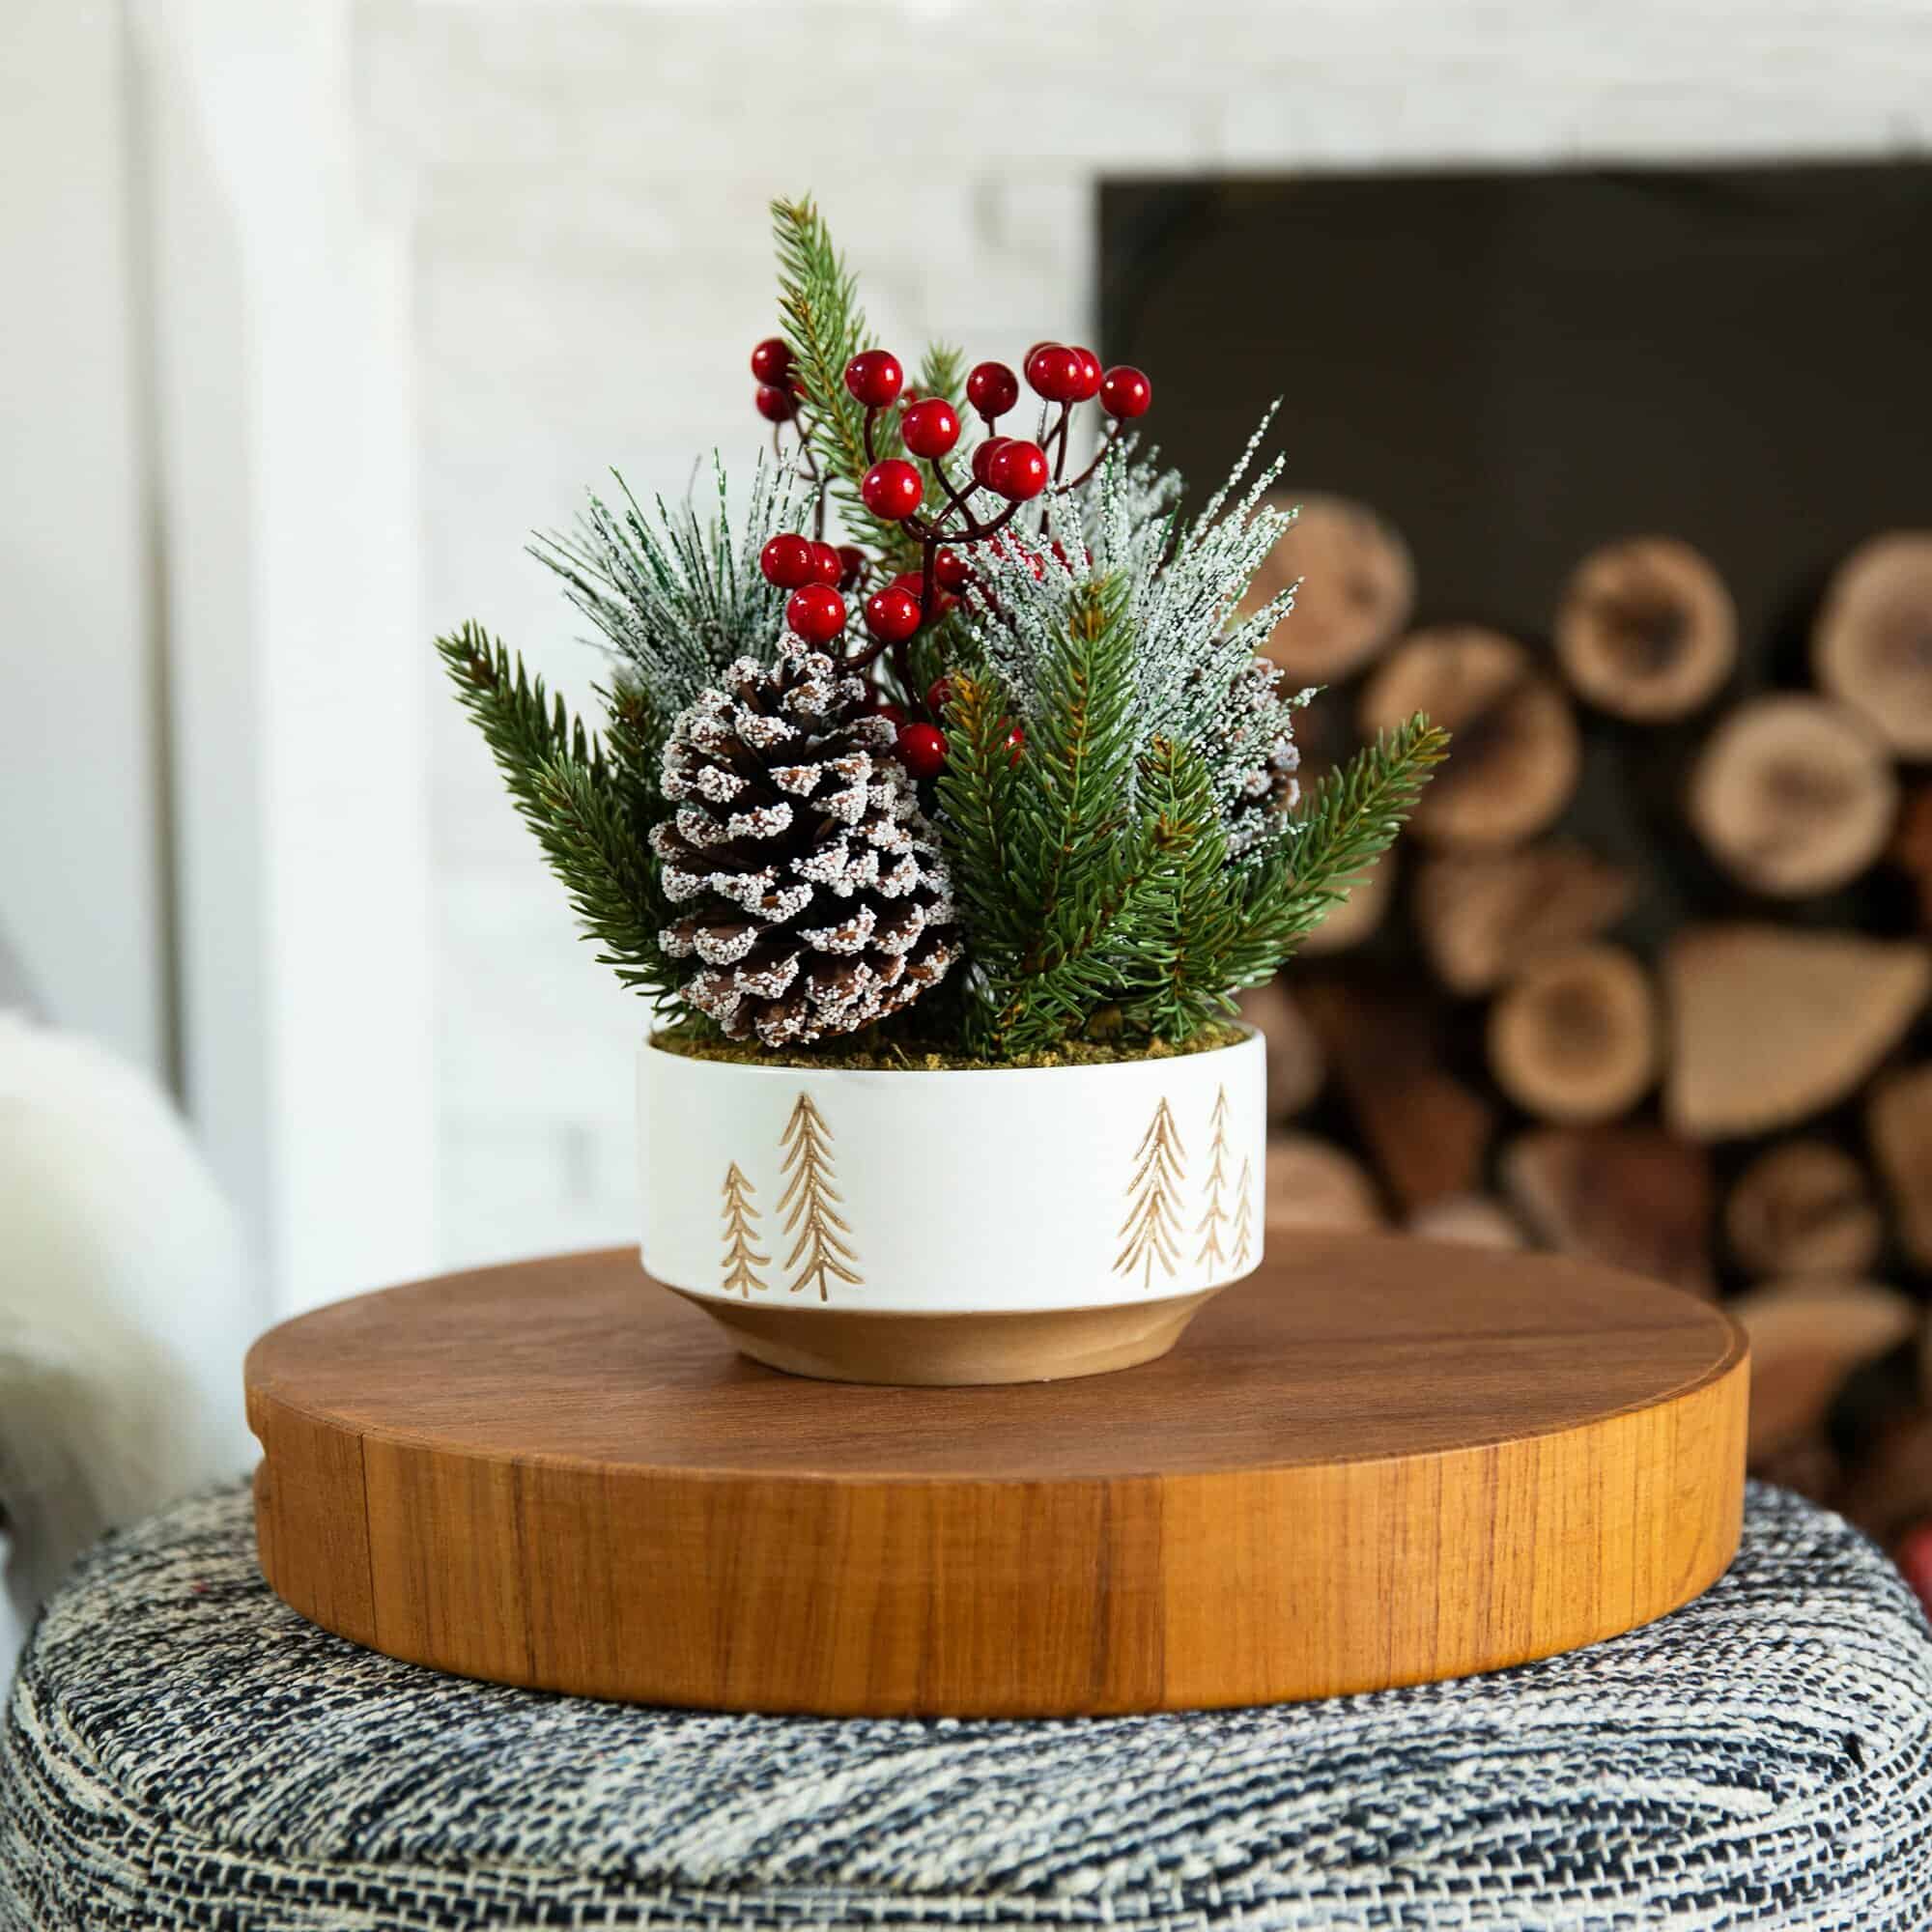 Add A Festive Table Arrangement For Some Holiday Spirit